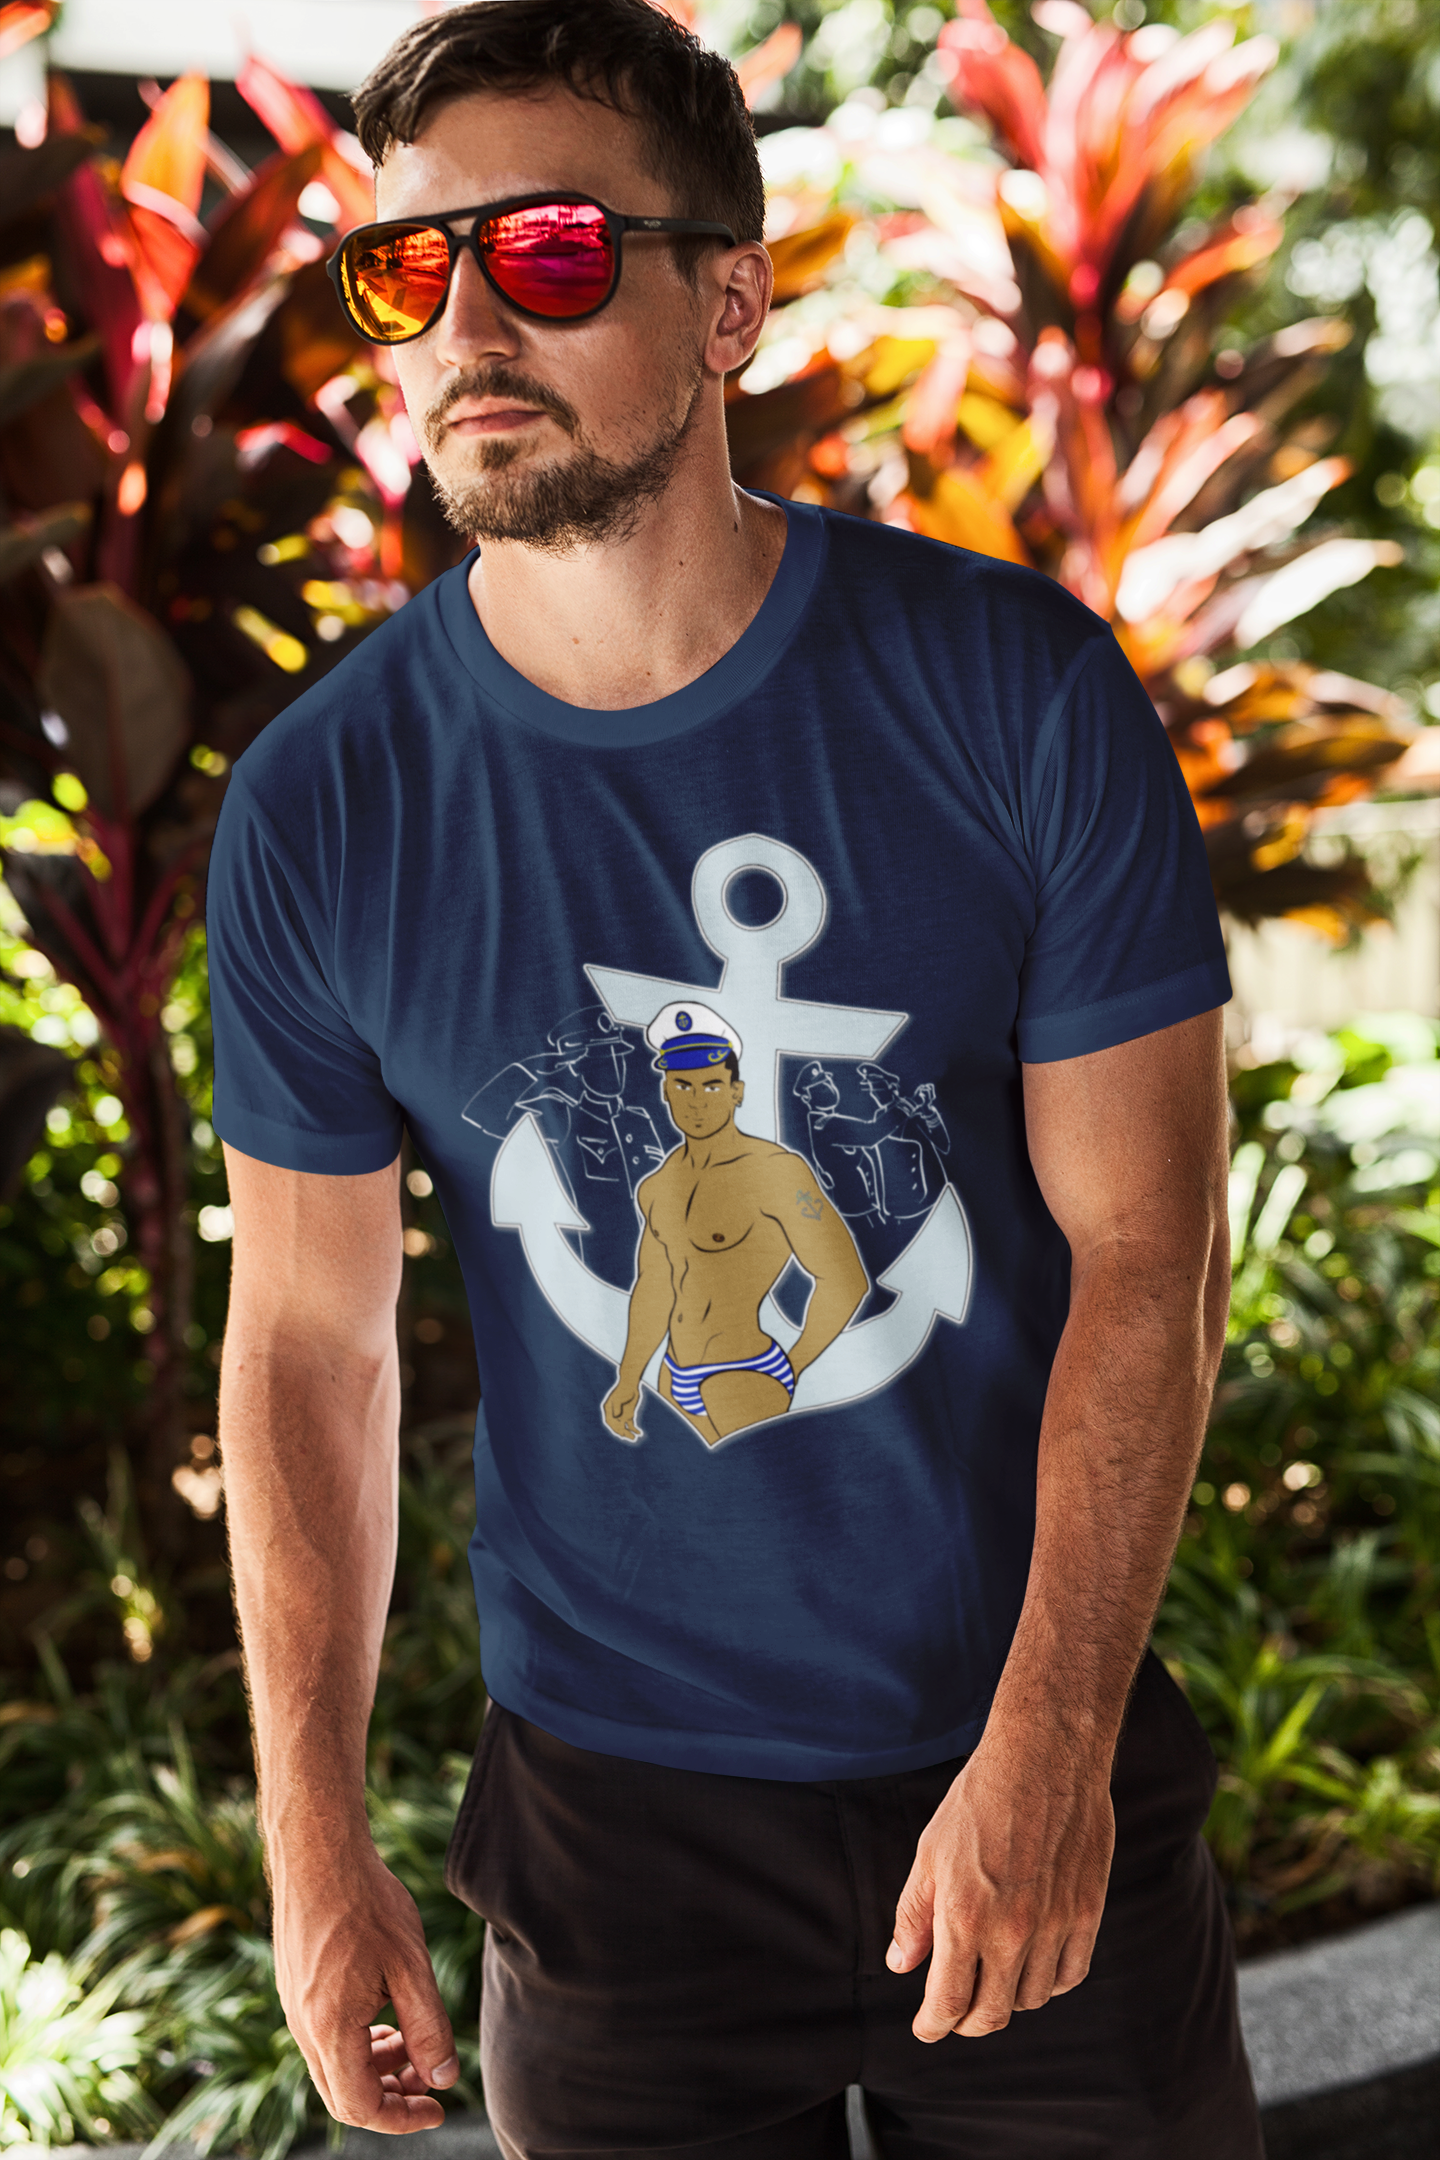 In the Navy Organic Cotton T-shirt